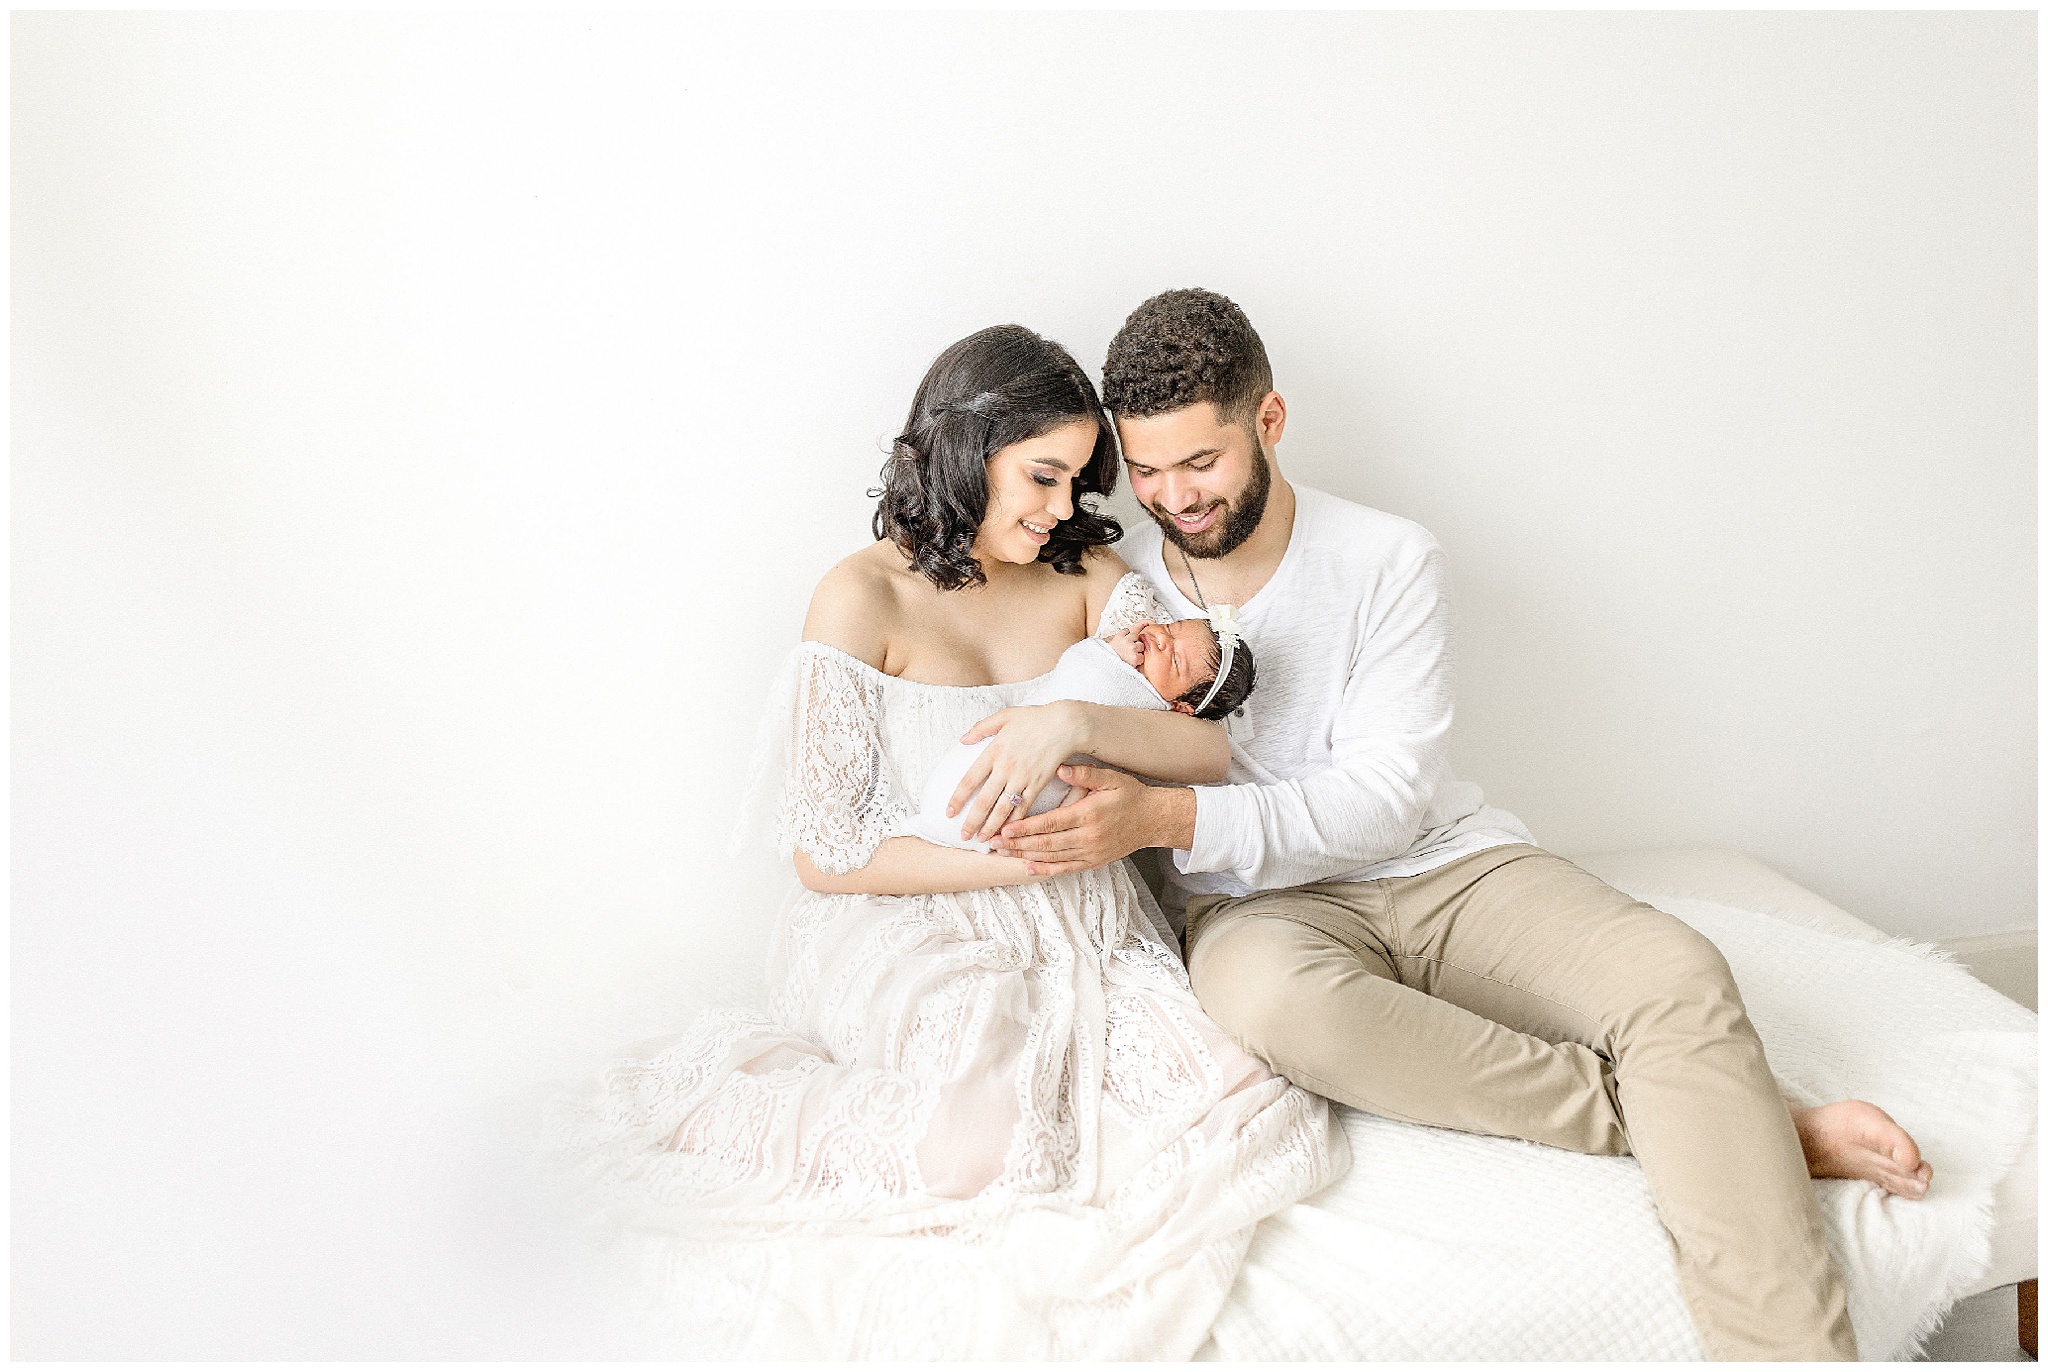 Mom and dad cradle baby girl. Photo by Ivanna Vidal Photography.